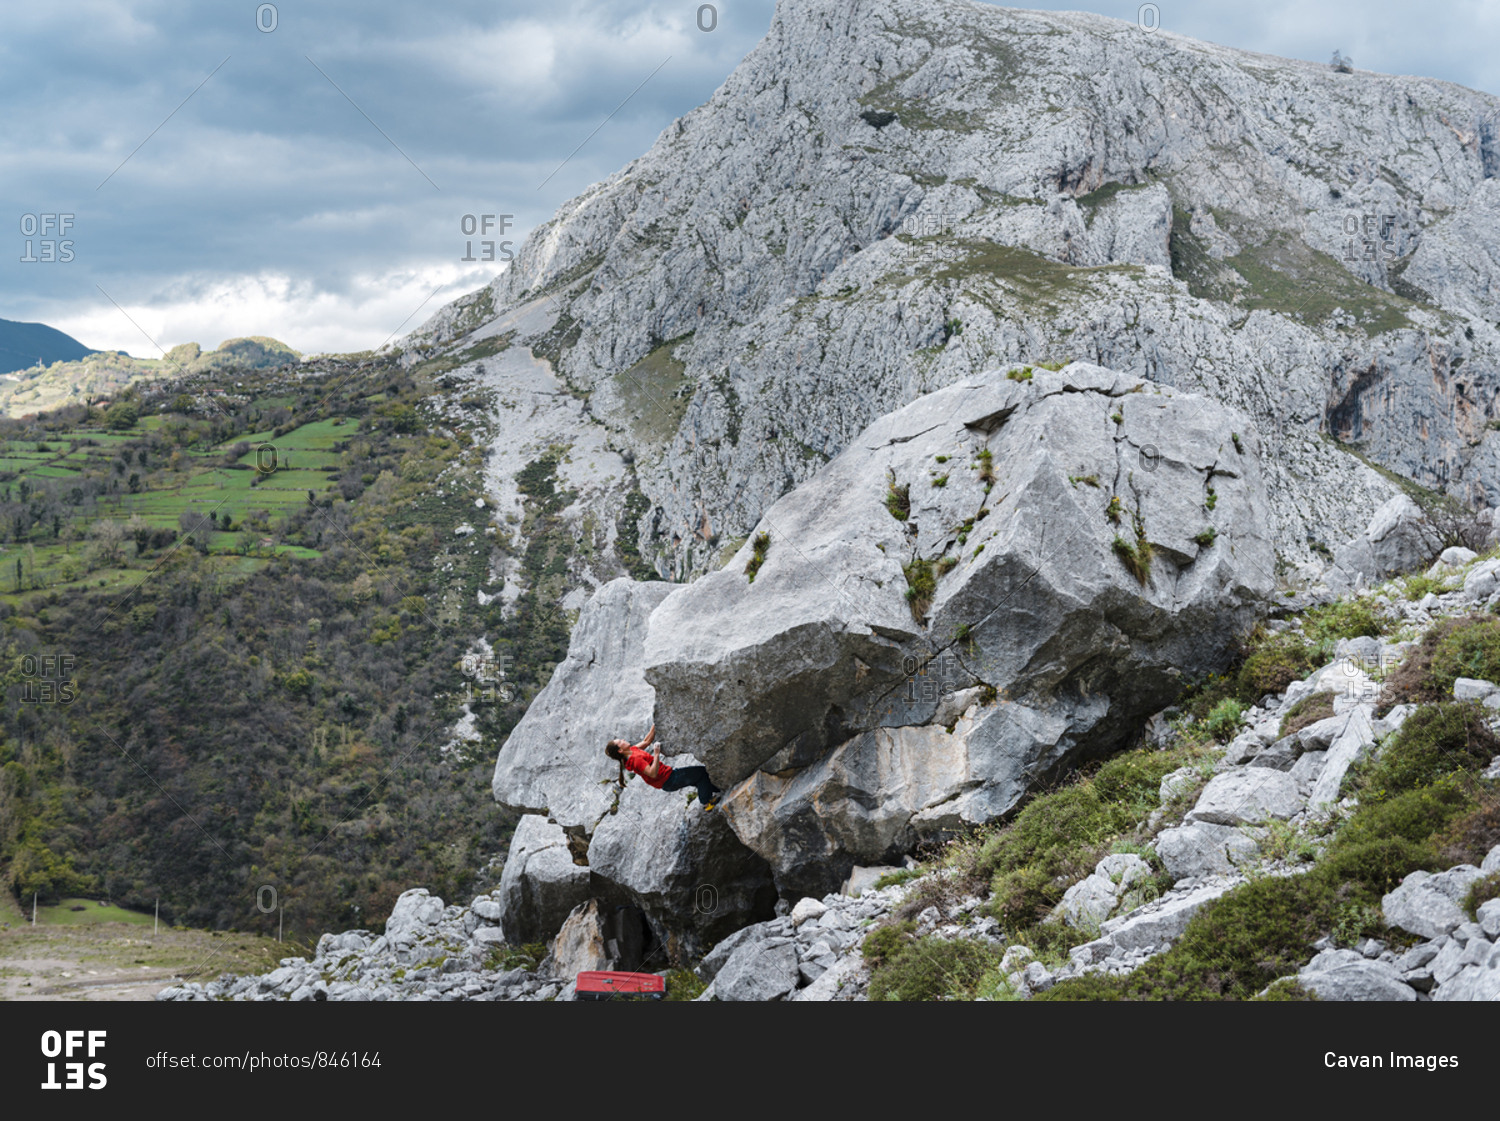 Woman climber trying gray limestone boulder on scenic forest landscape